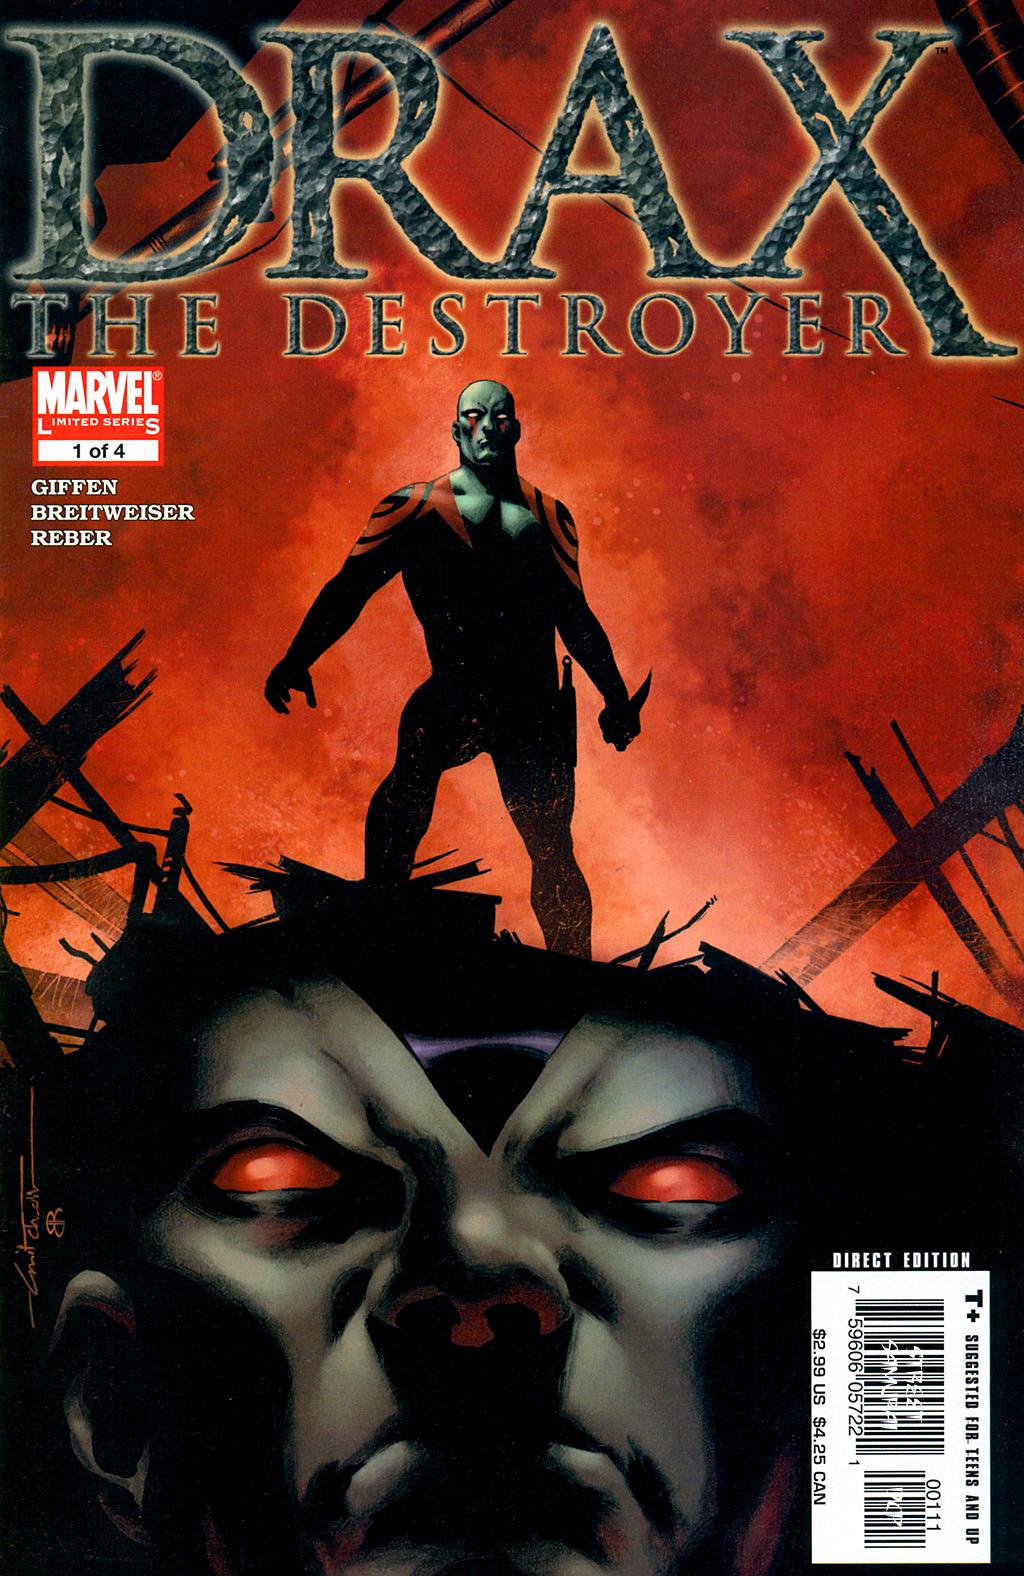 Drax the Destroyer Vol. 1 #1